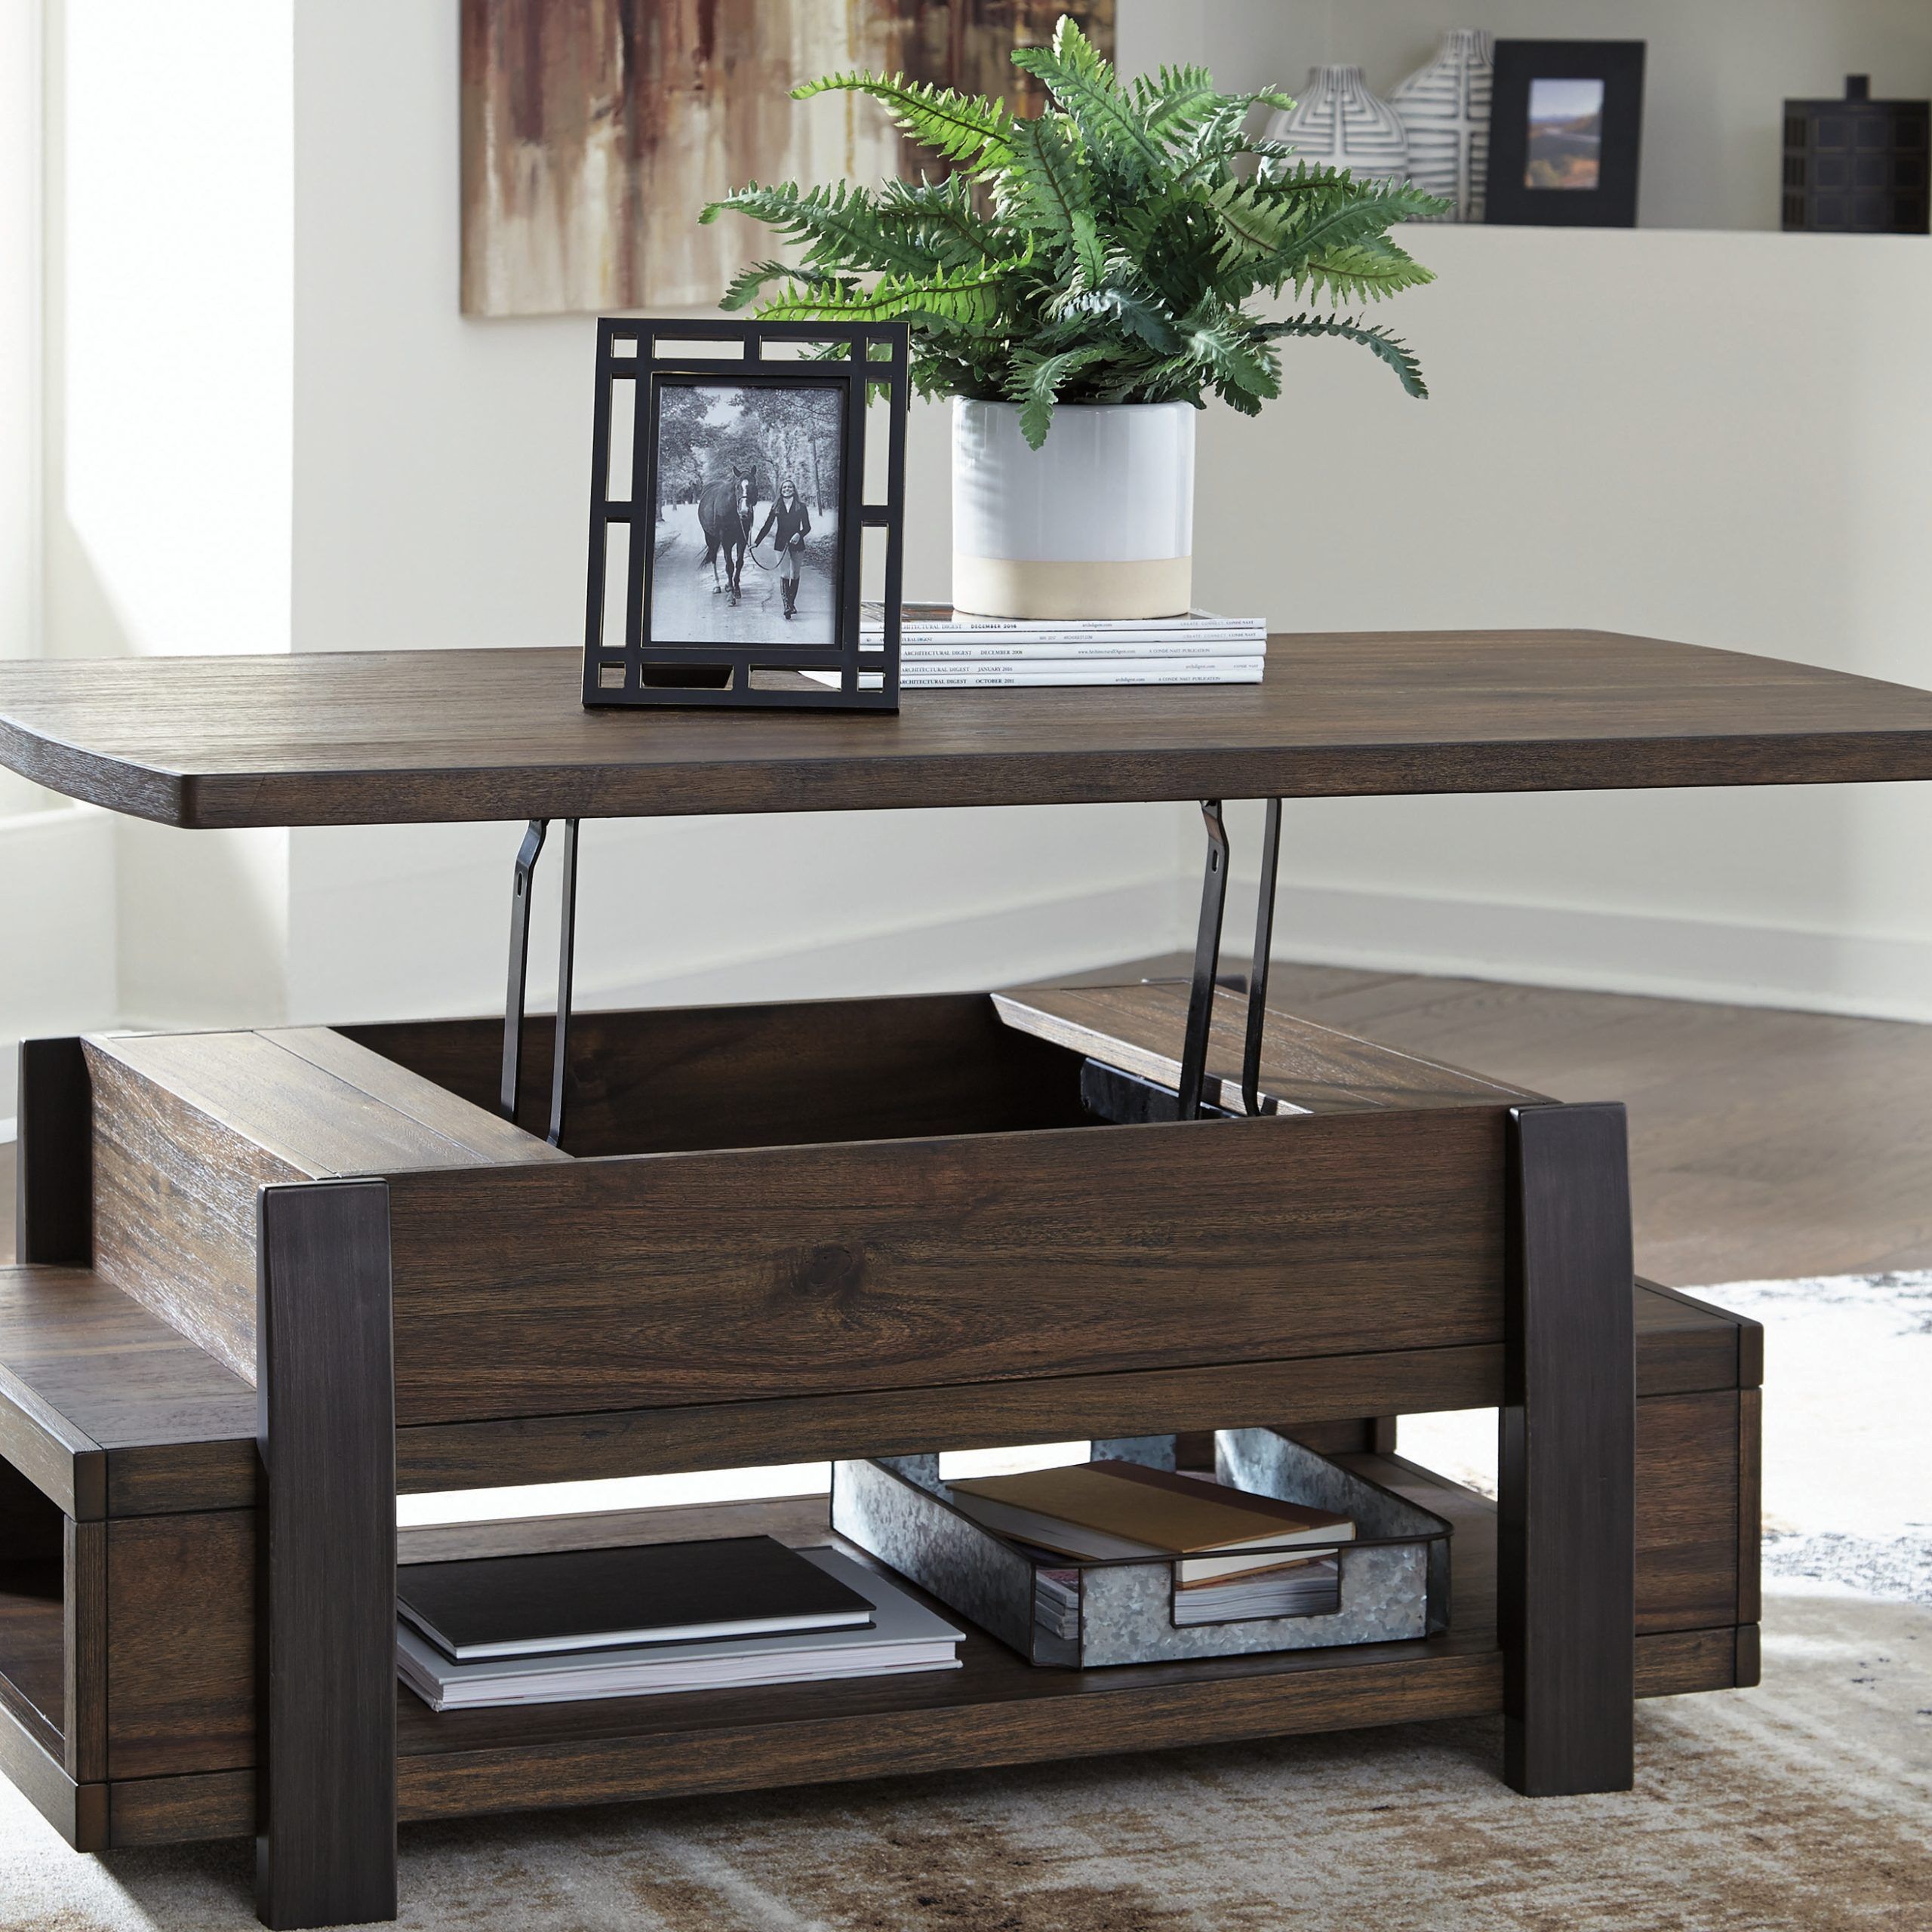 Vailbry Coffee Table With Lift Top T758 9signature Designashley In Lift Top Coffee Tables With Storage (View 8 of 20)